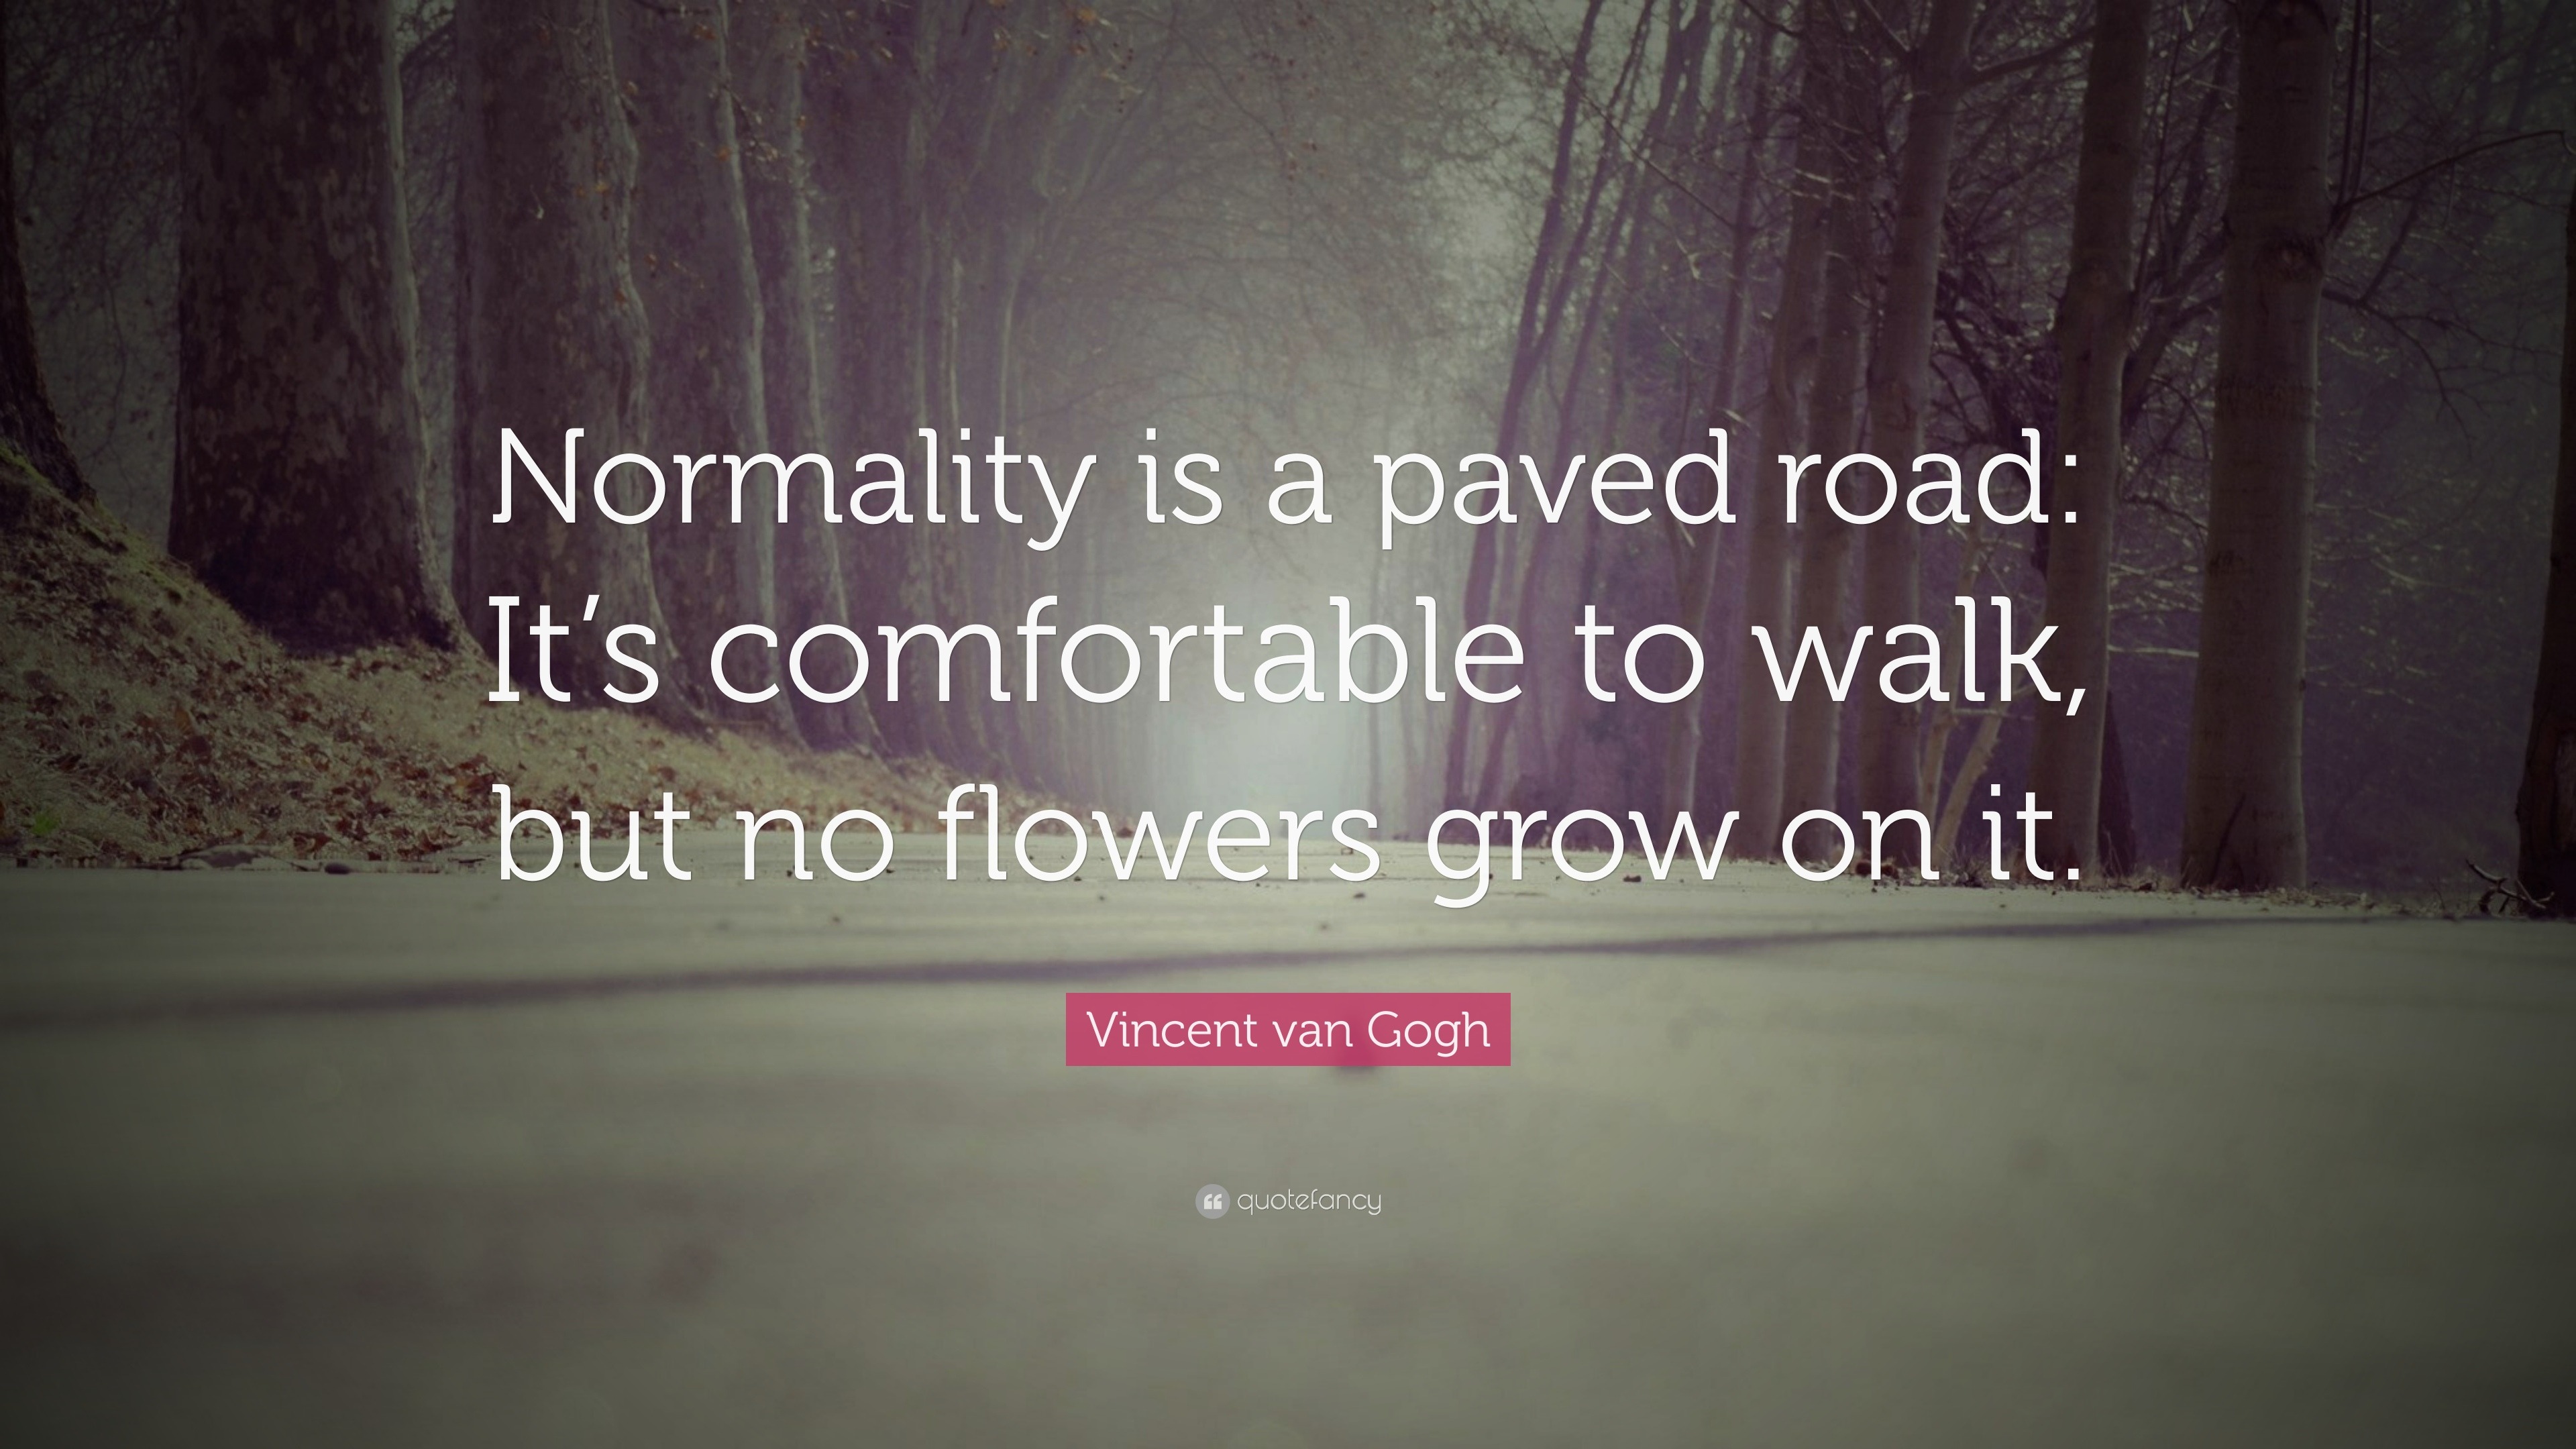 Vincent van Gogh Quote: “Normality is a 